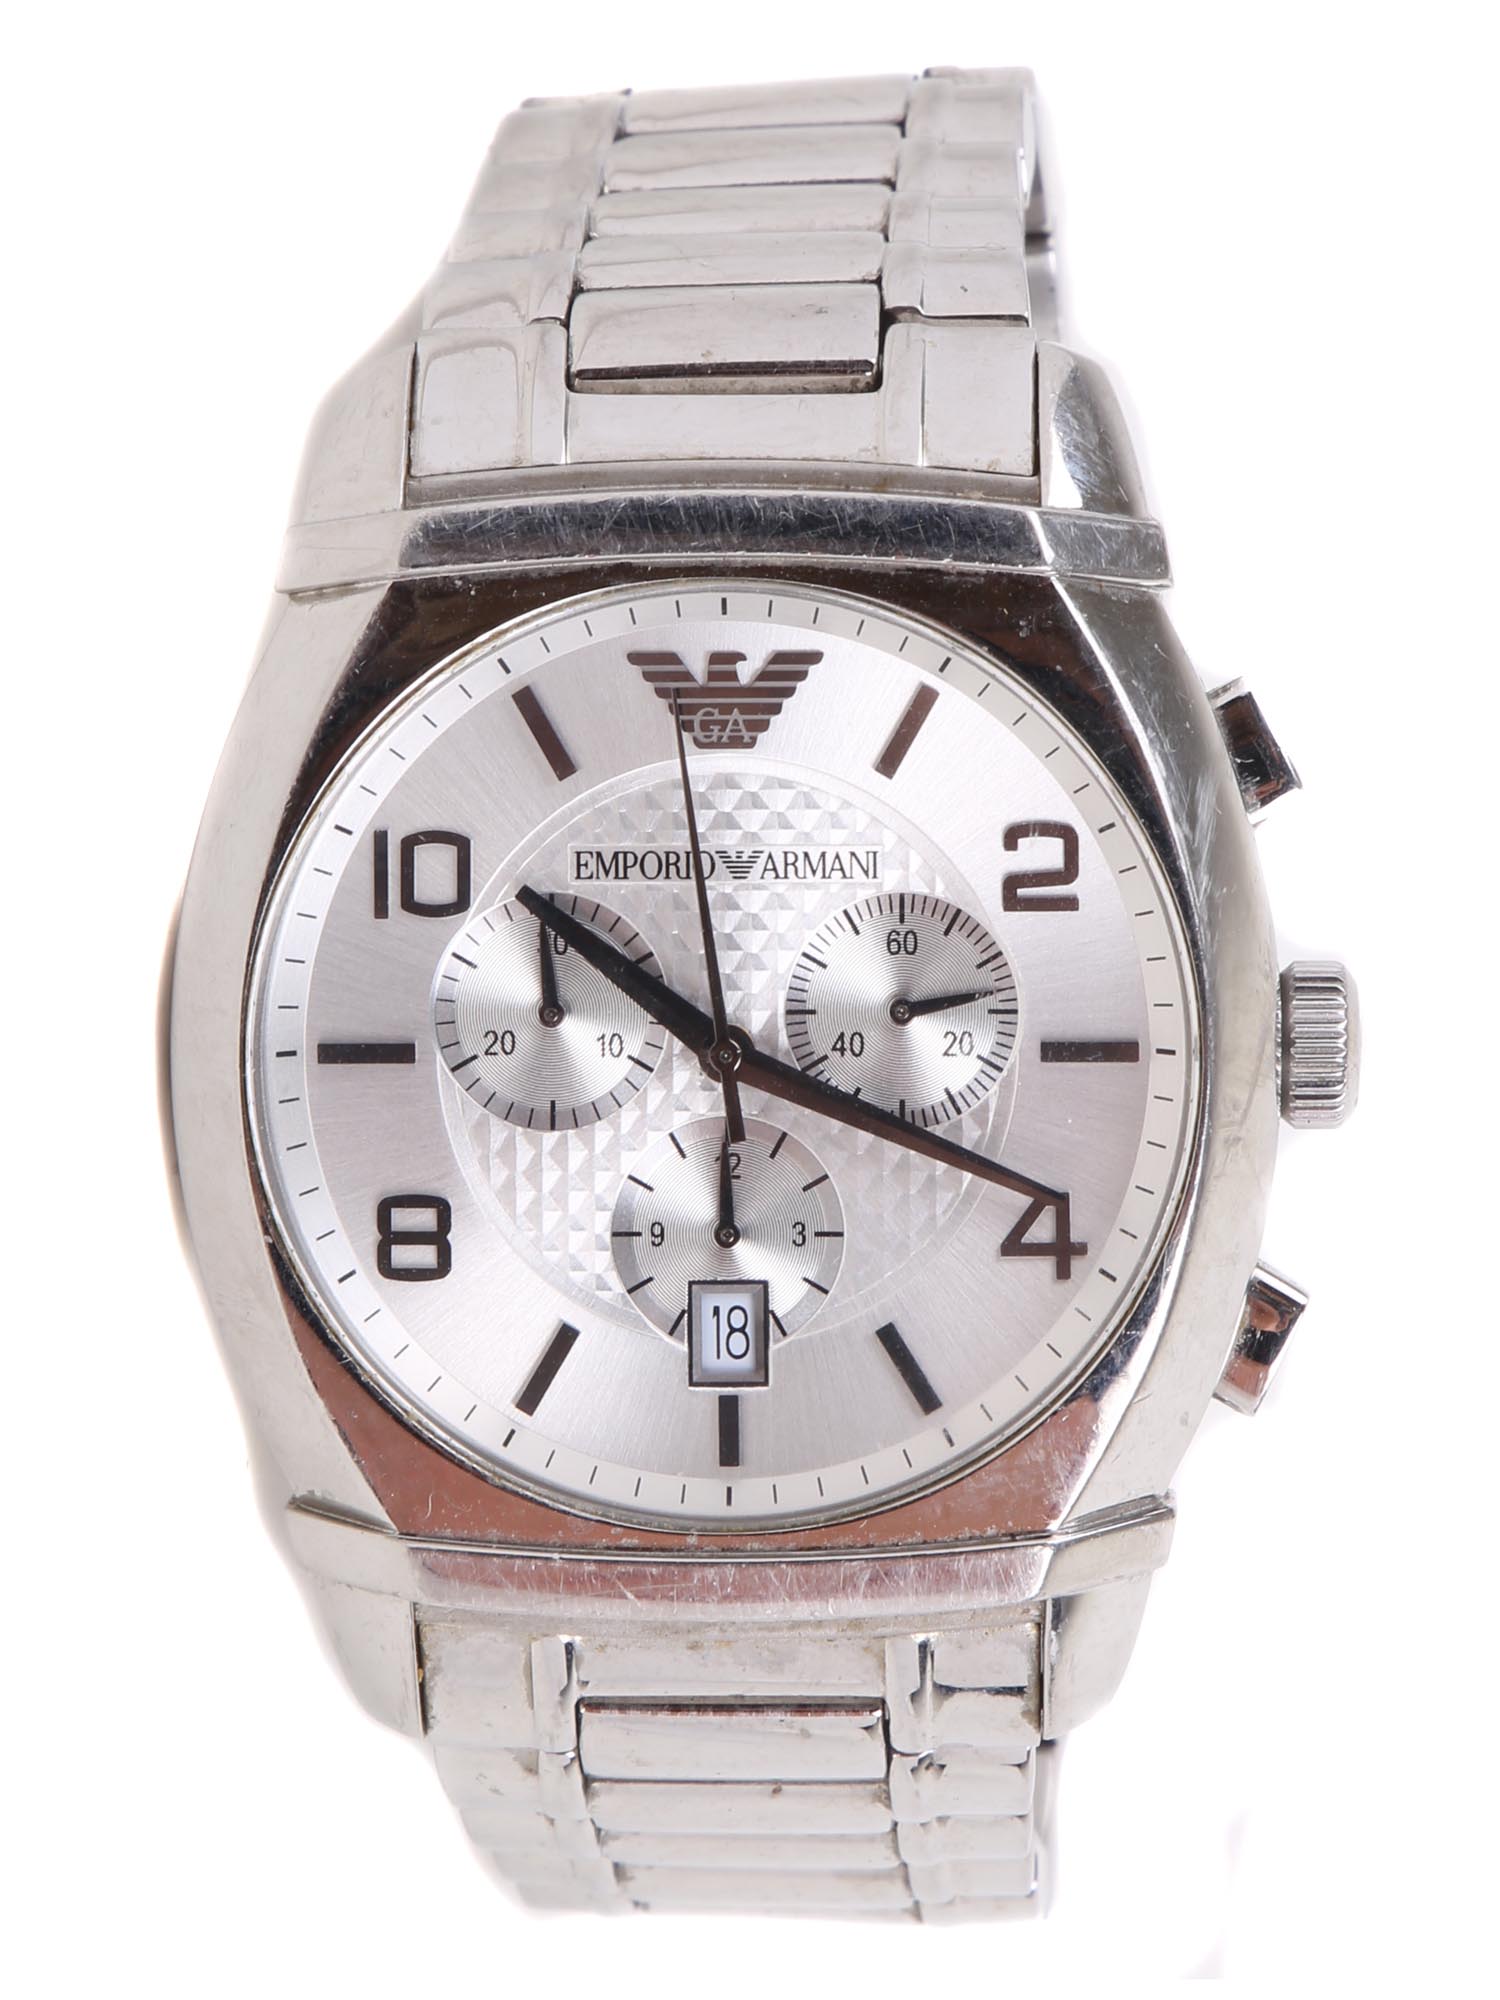 AN EMPORIO ARMANI MEN STAINLESS STEEL WRIST WATCH PIC-1